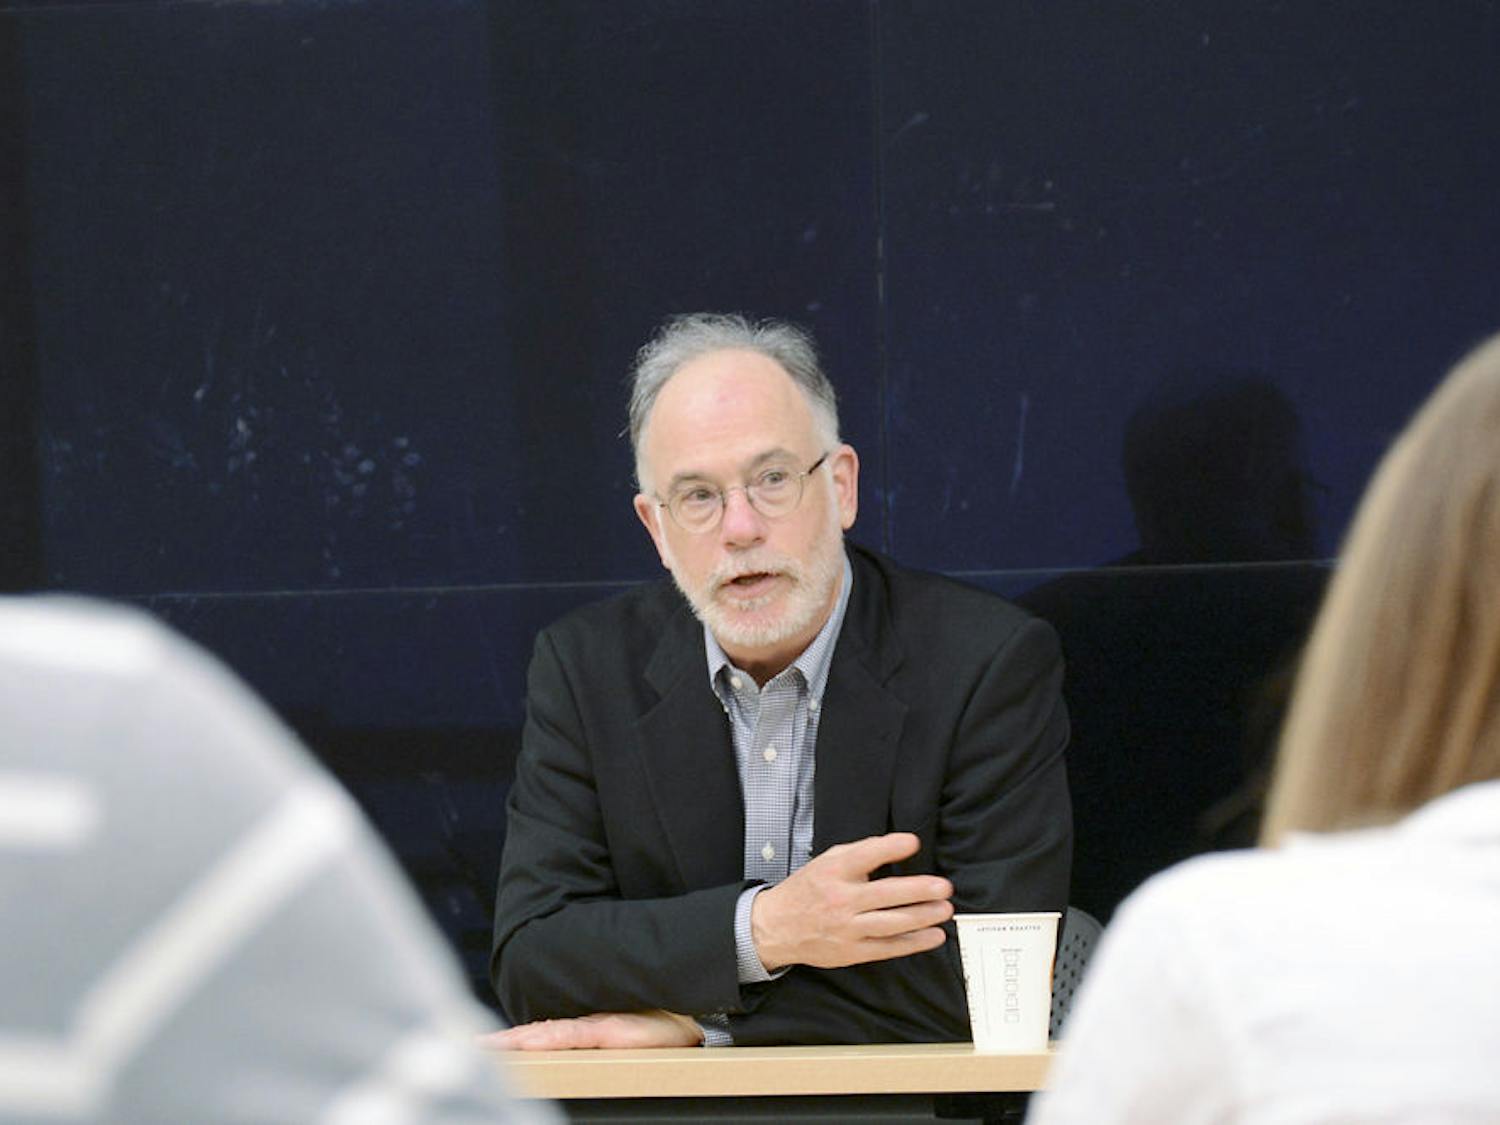 Ross Wilson, a former U.S. ambassador to Turkey and Azerbaijan, answers students’ questions during a Q&amp;A session in Marston Science Library on Thursday. “I wanted to do foreign policy,” he said. “That is what I wanted to do as a career.”